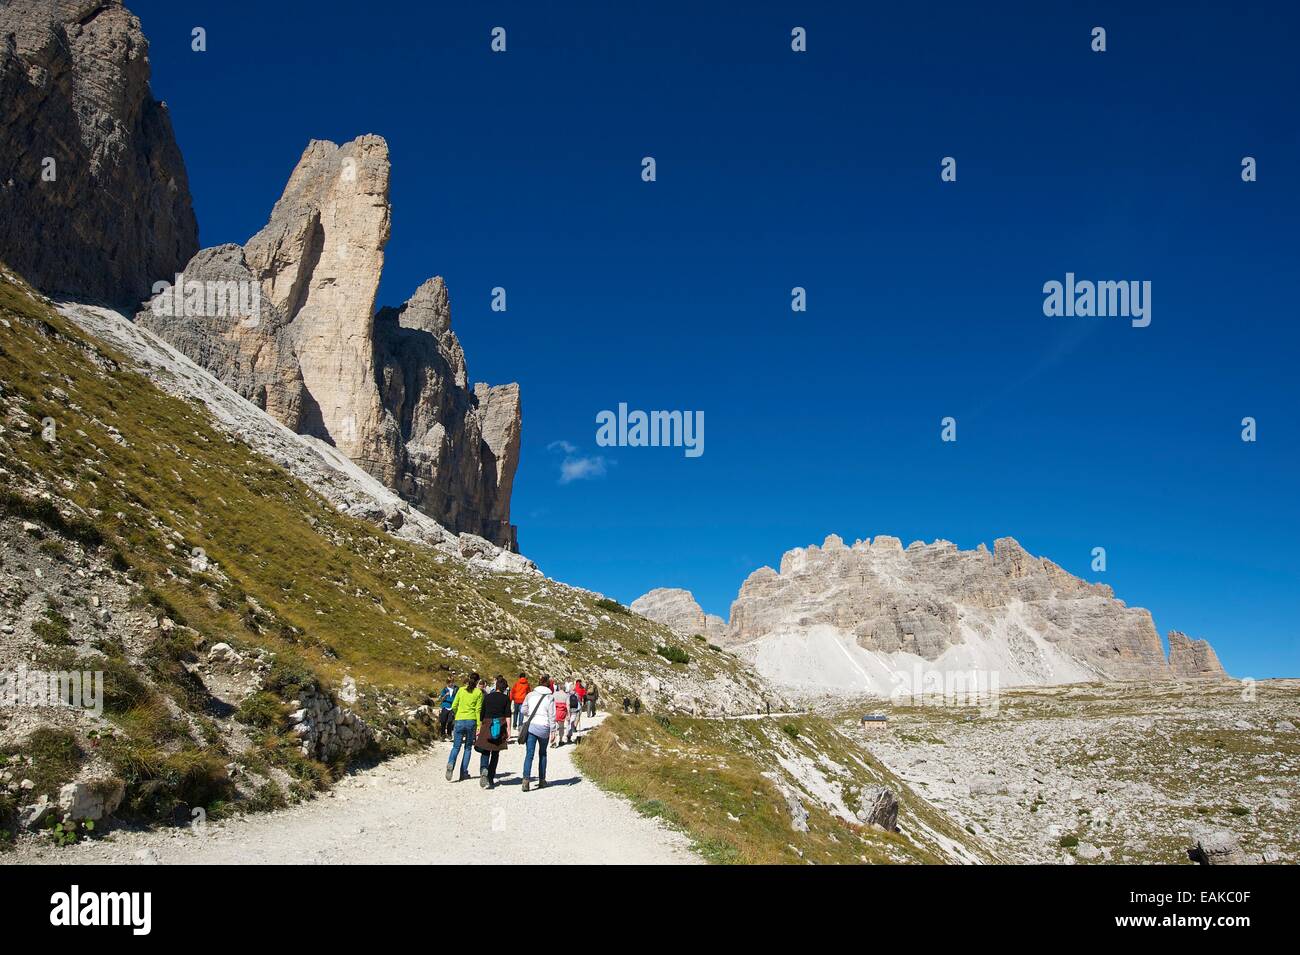 Hikers on the trail to the Three Peaks, Sextner Dolomiten, South Tyrol province, Trentino-Alto Adige, Italy Stock Photo